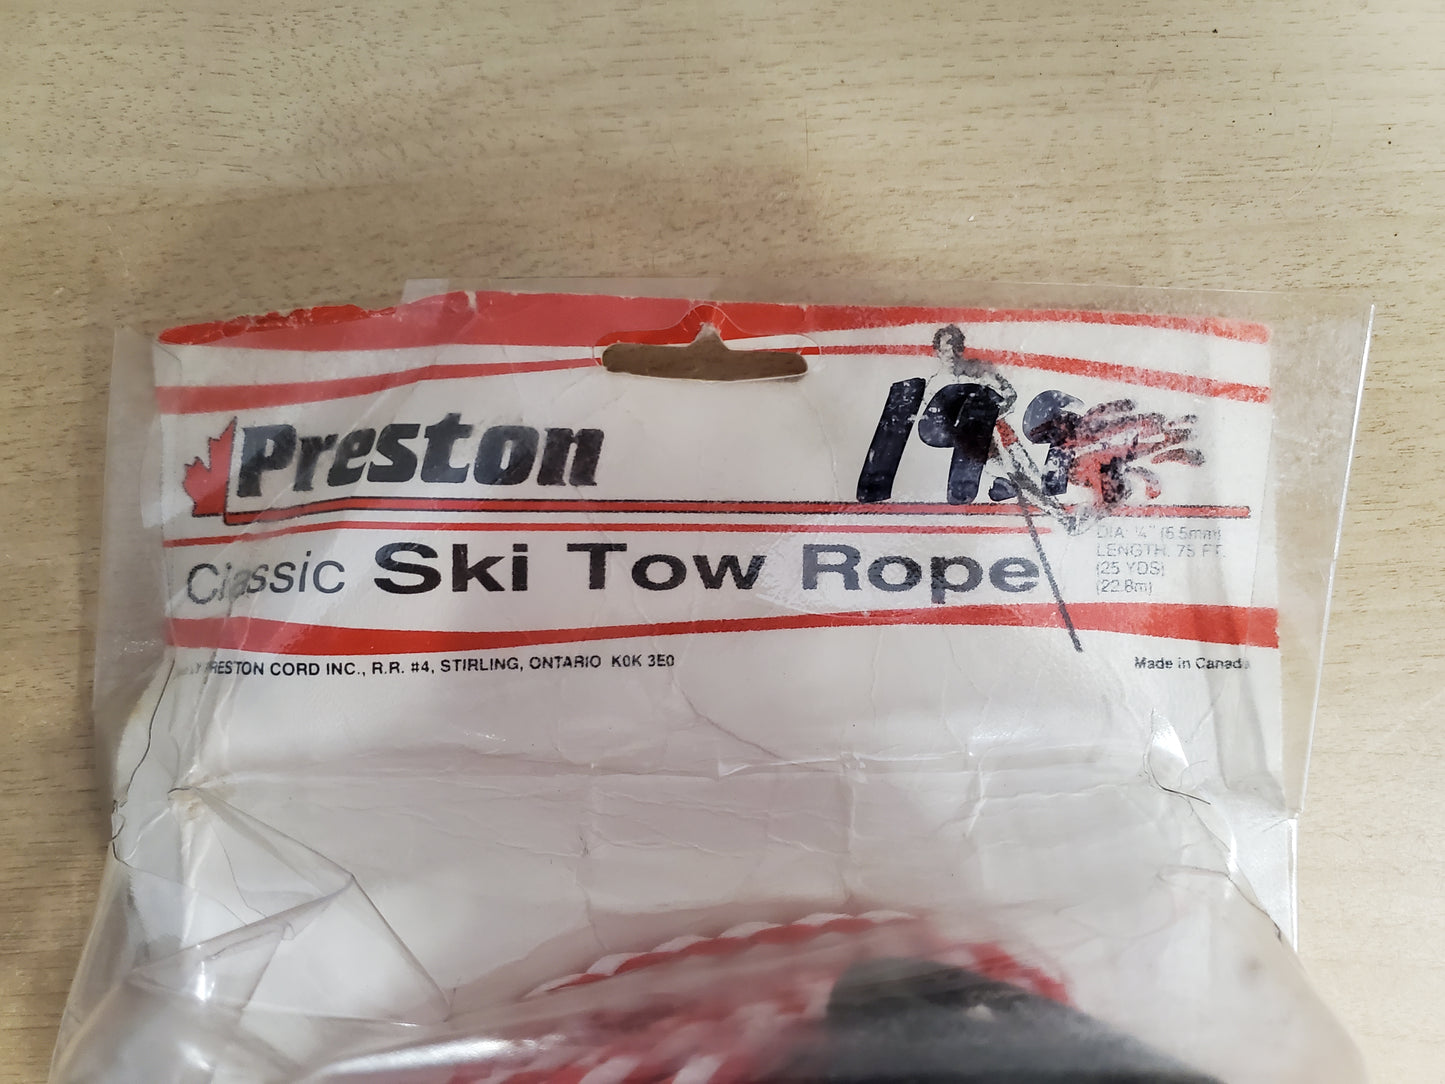 Water Sports Ski Tow Rope Classic New In Package 75 feet Made in Canada